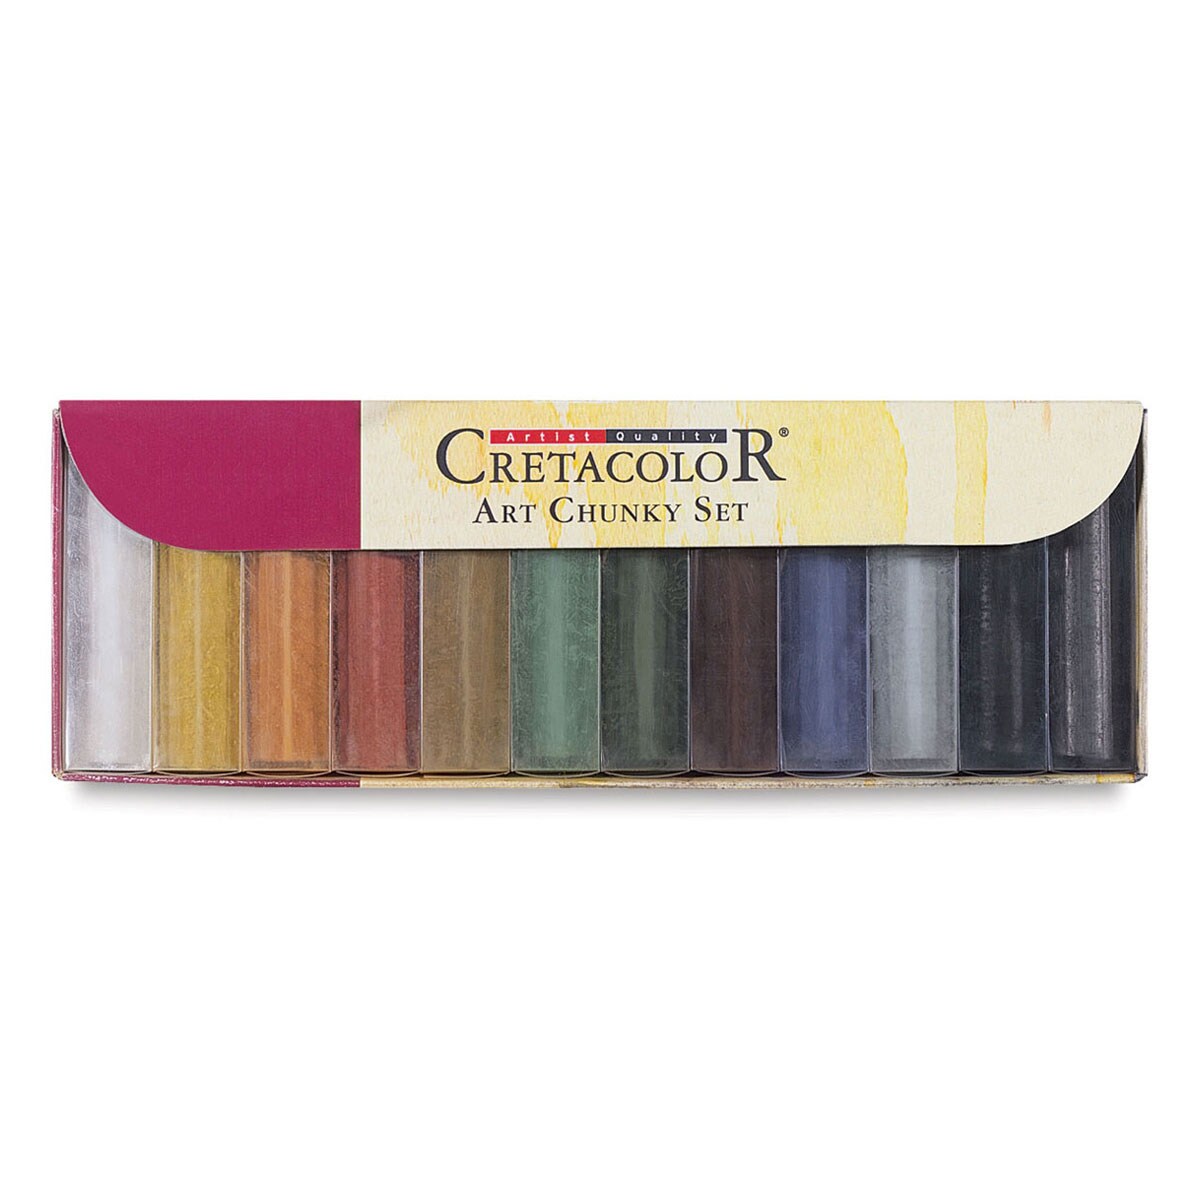 Cretacolor Chunky Charcoal Set - Assorted Colors, Set of 12